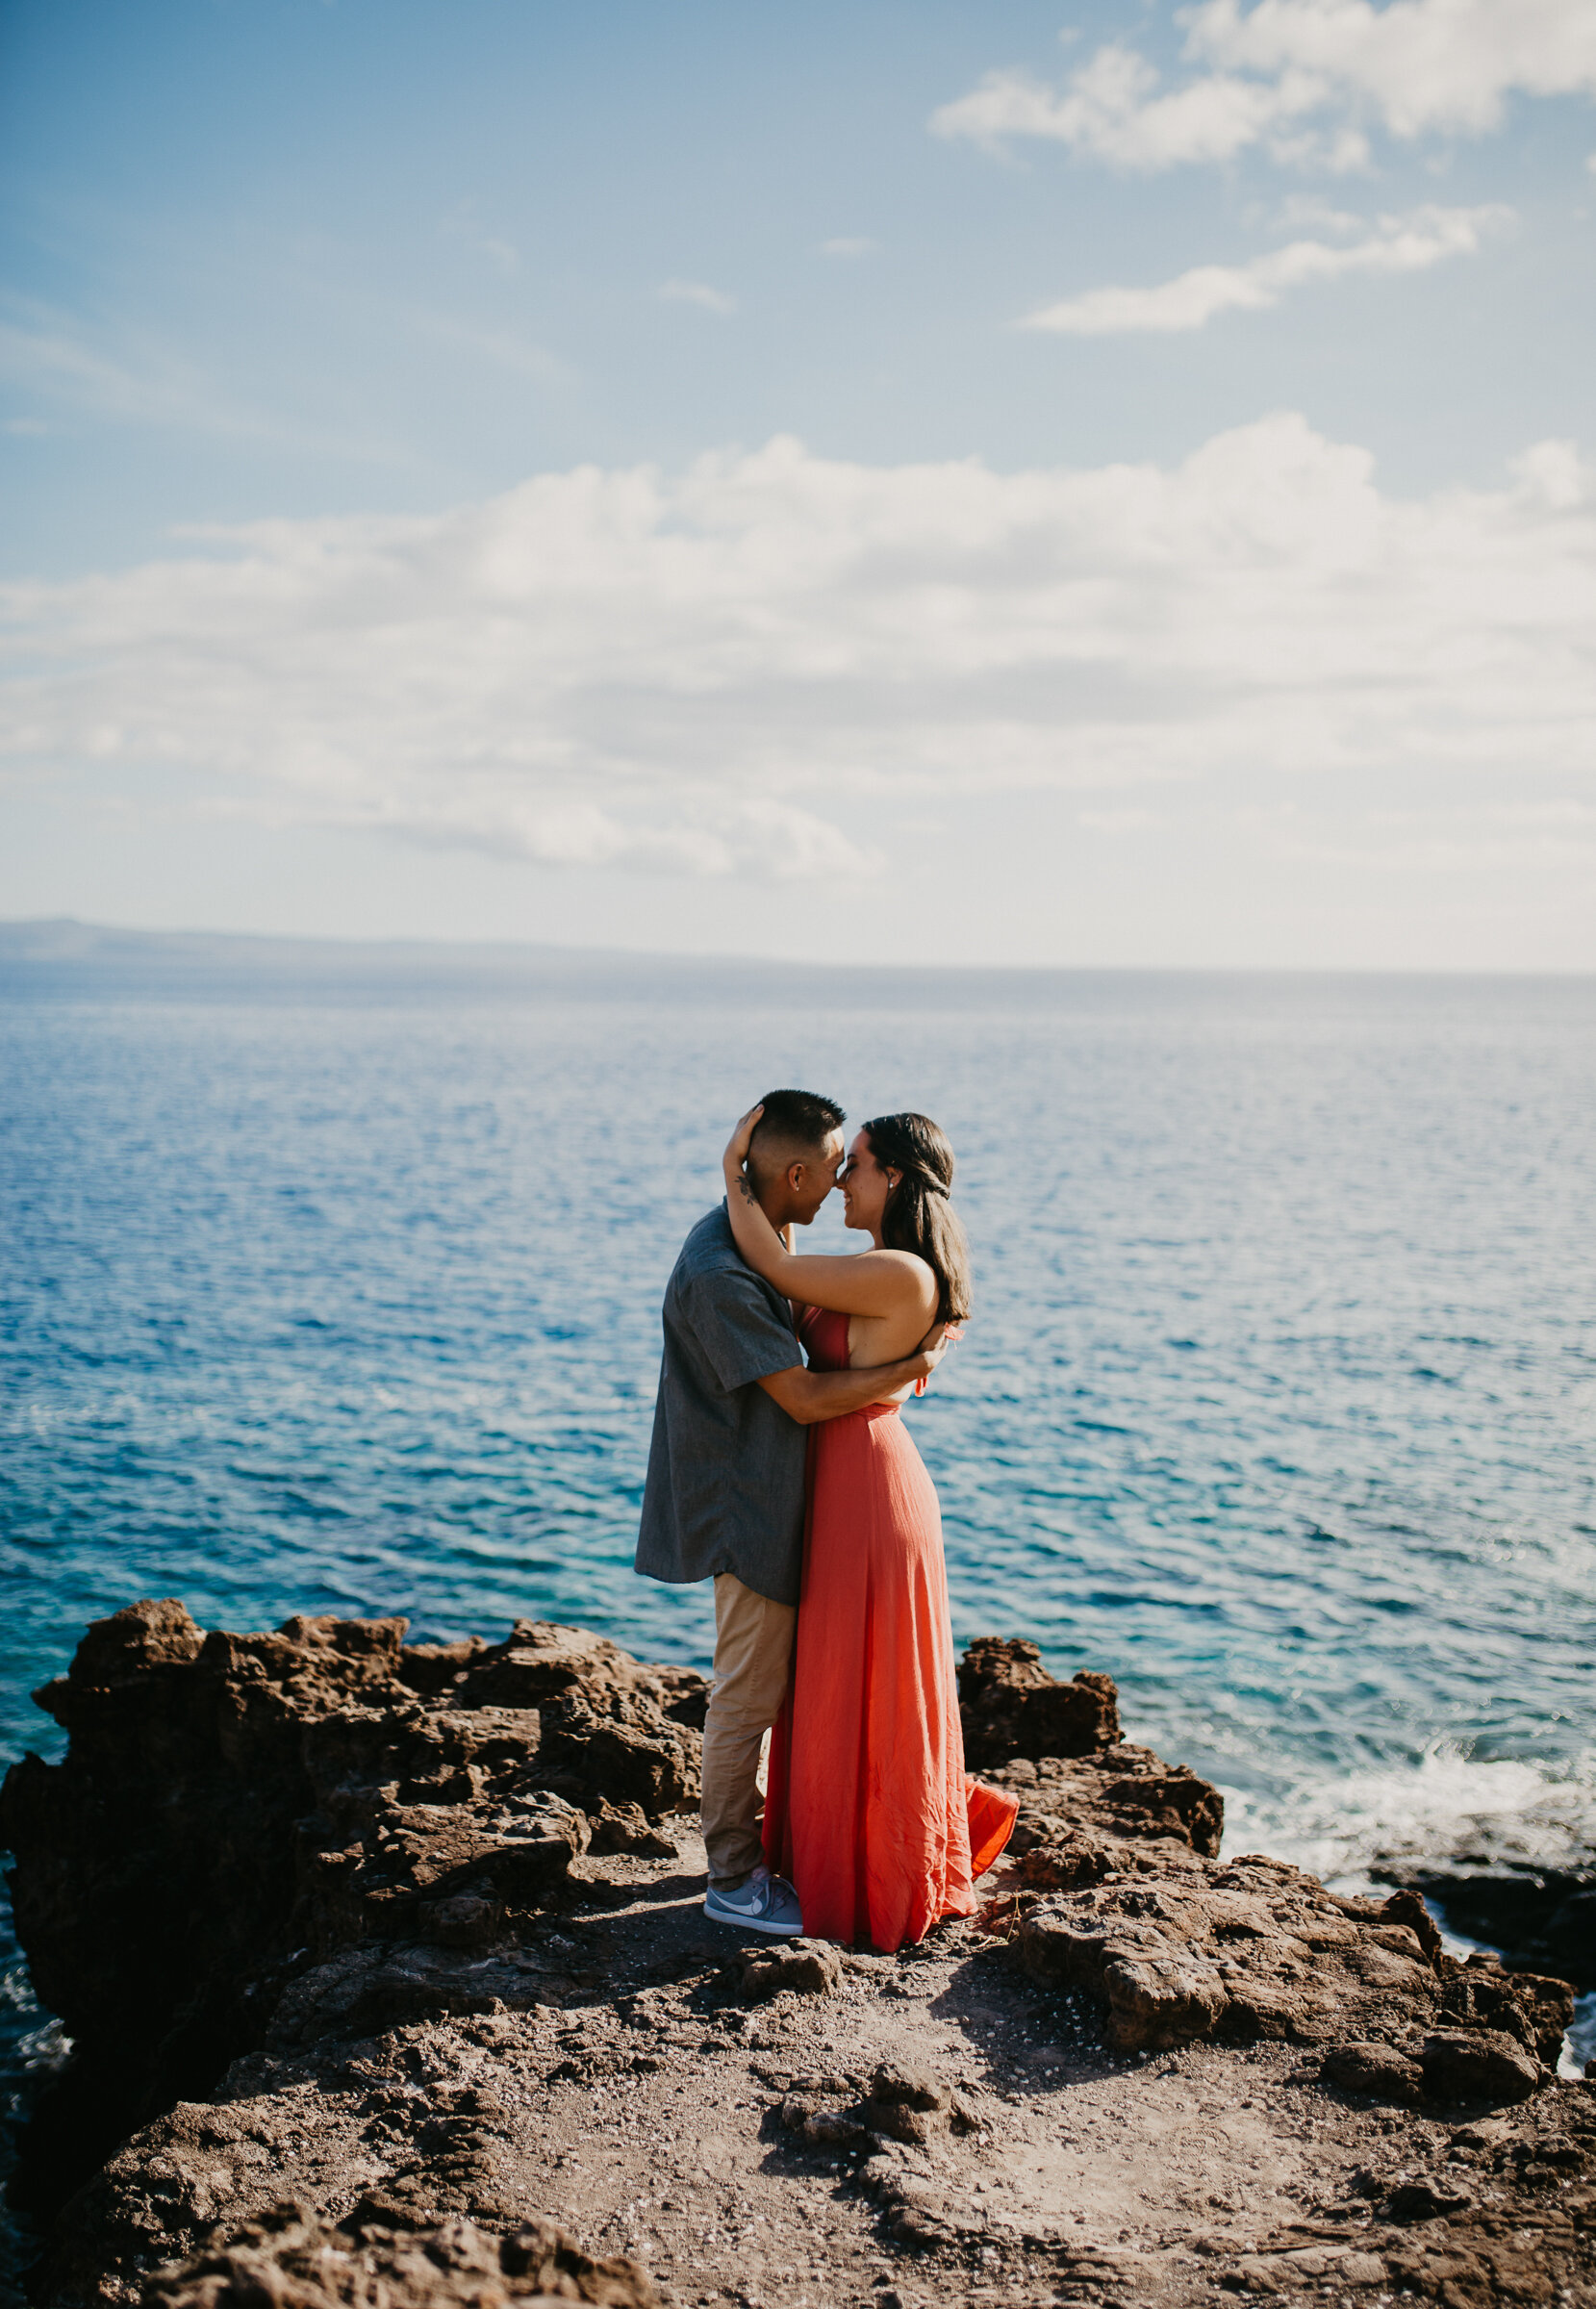  Engagement session in Maui, Hawaii overlooking the ocean 